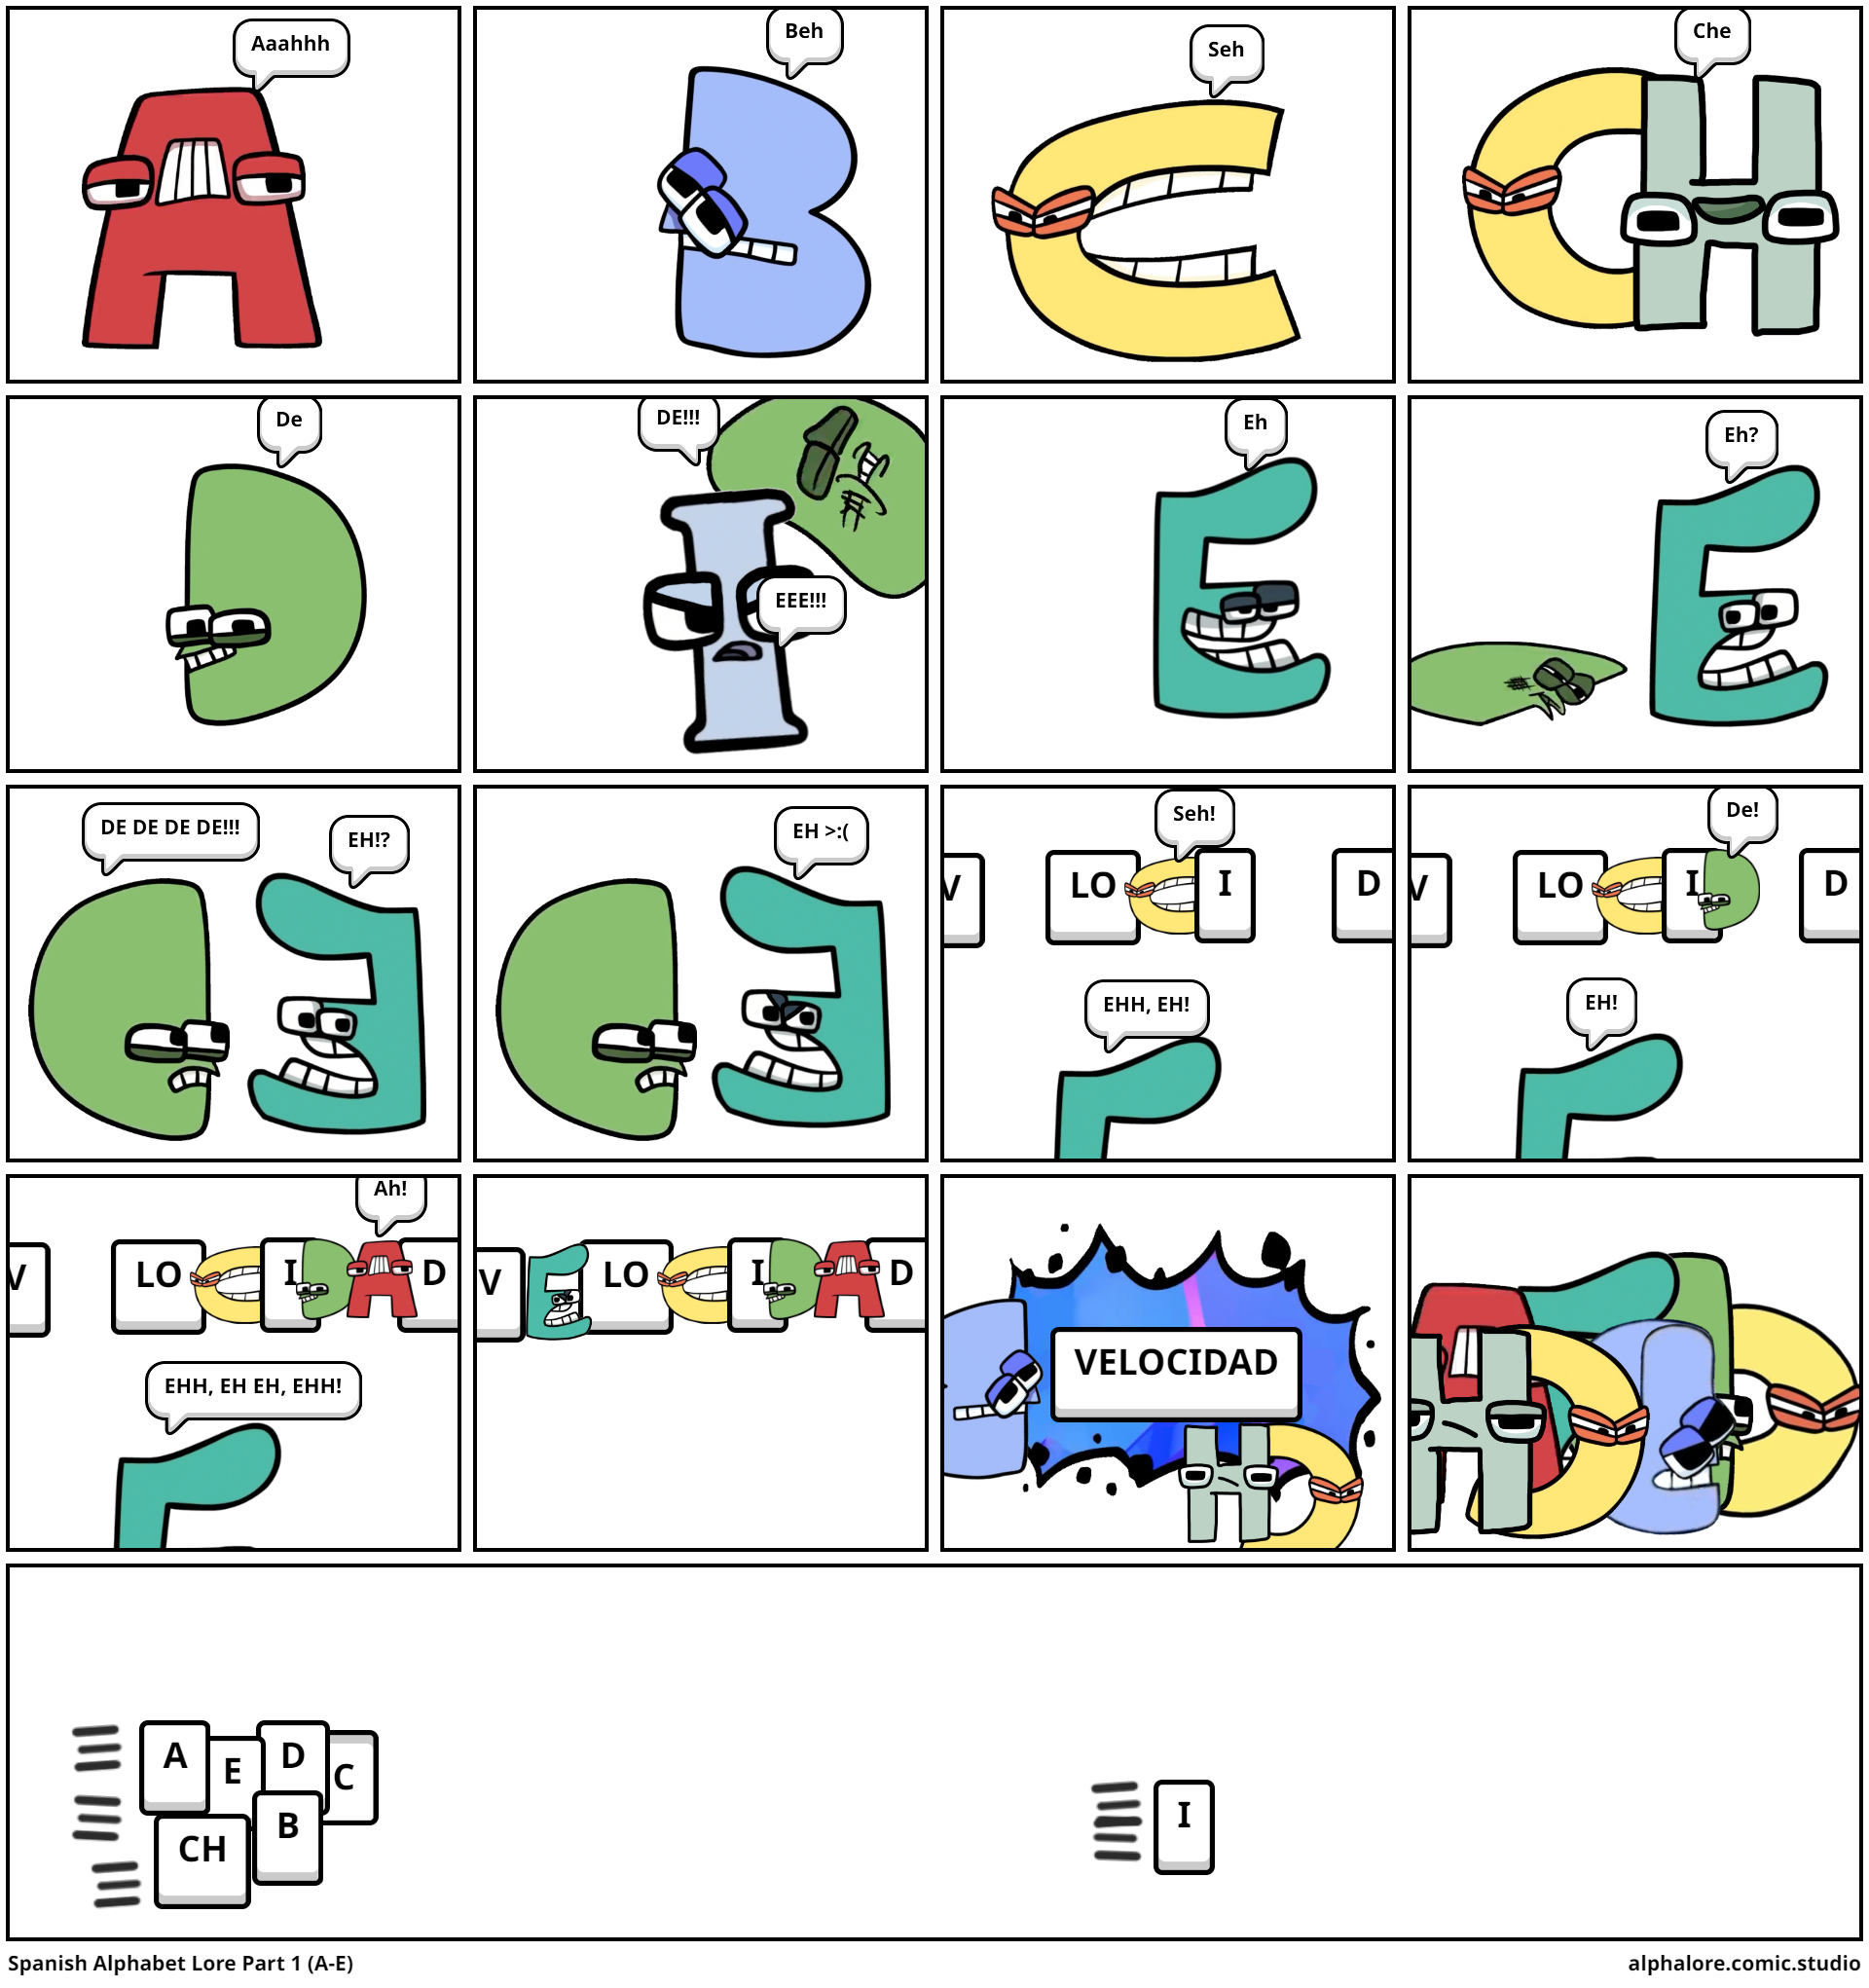 a normal day in Spanish Alphabet Lore land - Comic Studio